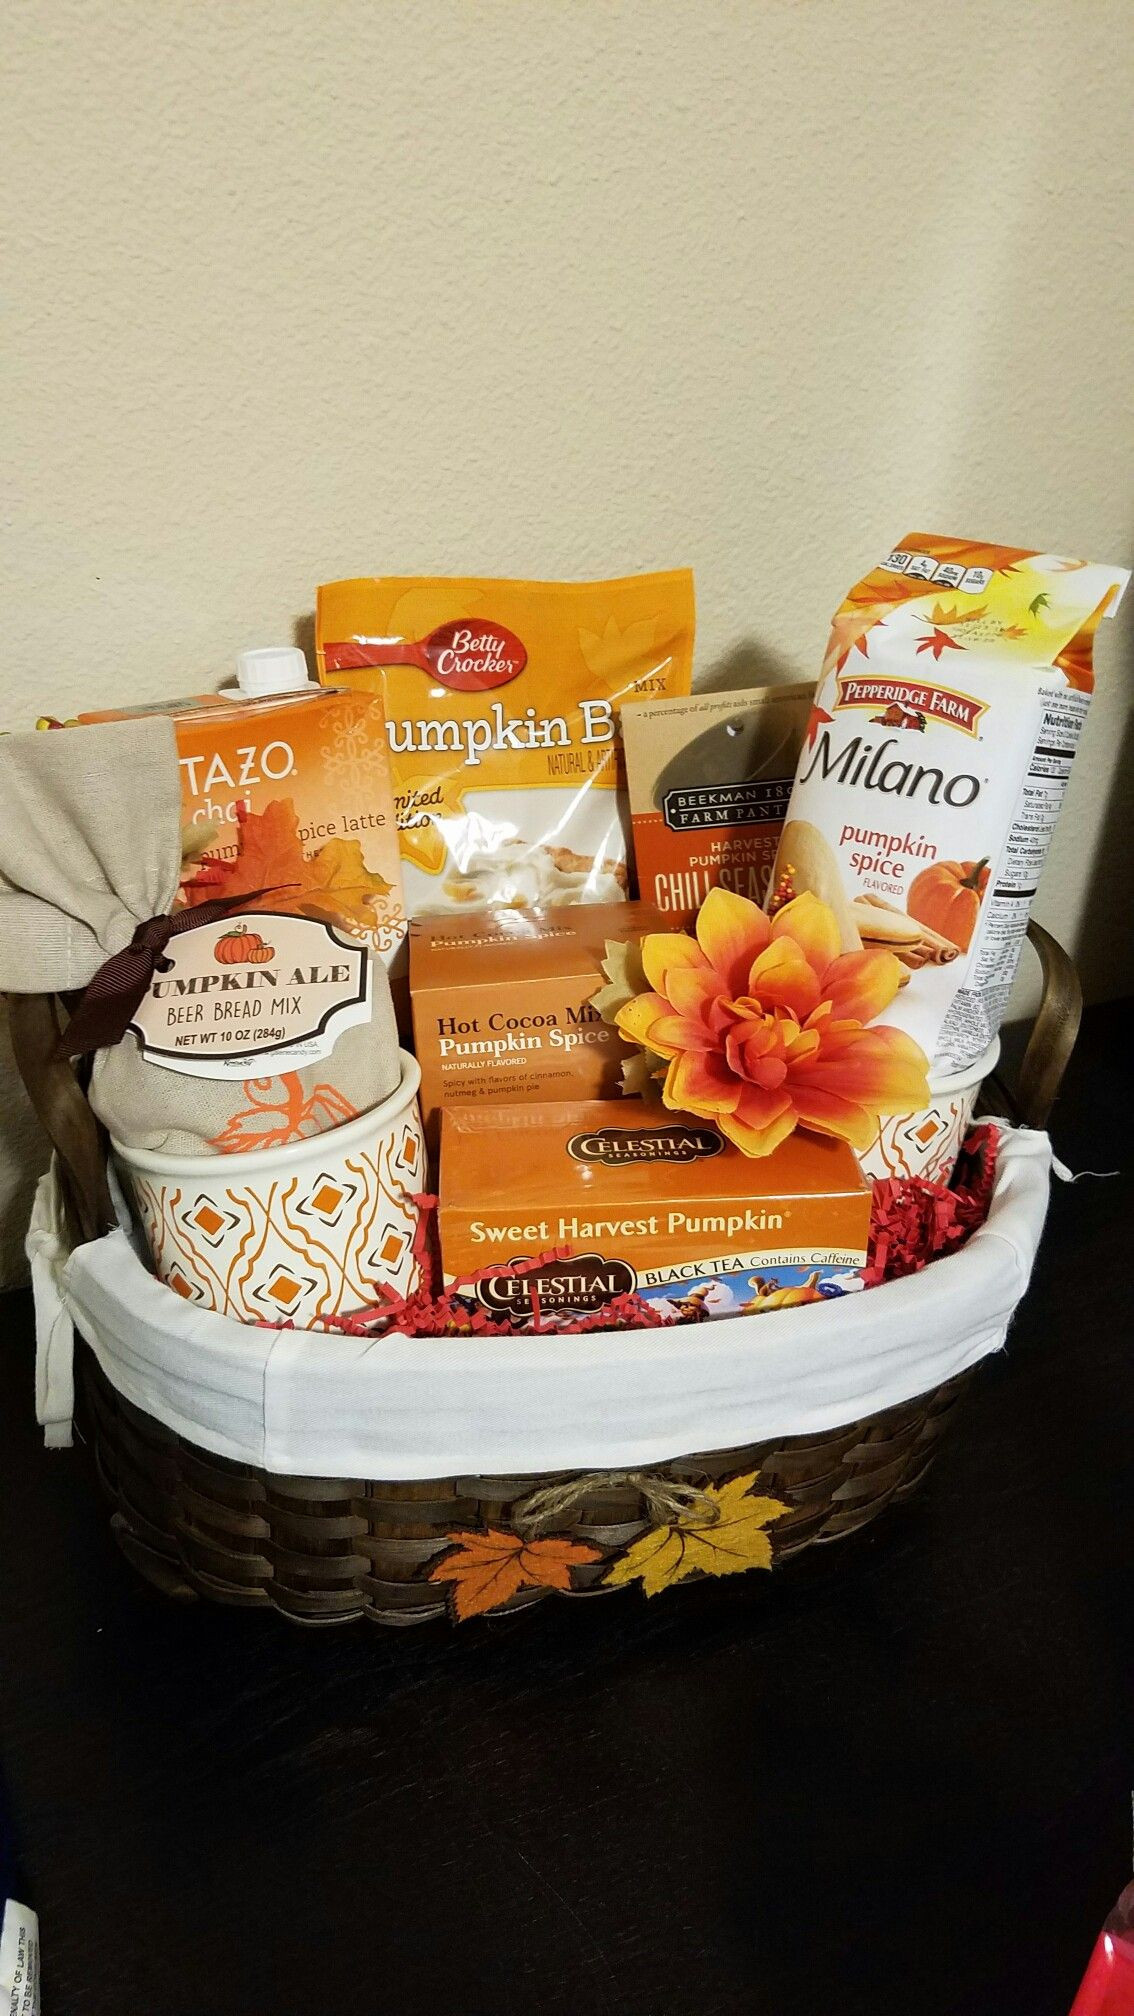 Gift Baskets Ideas For Work
 The 22 Best Ideas for Work Gift Basket Ideas Home